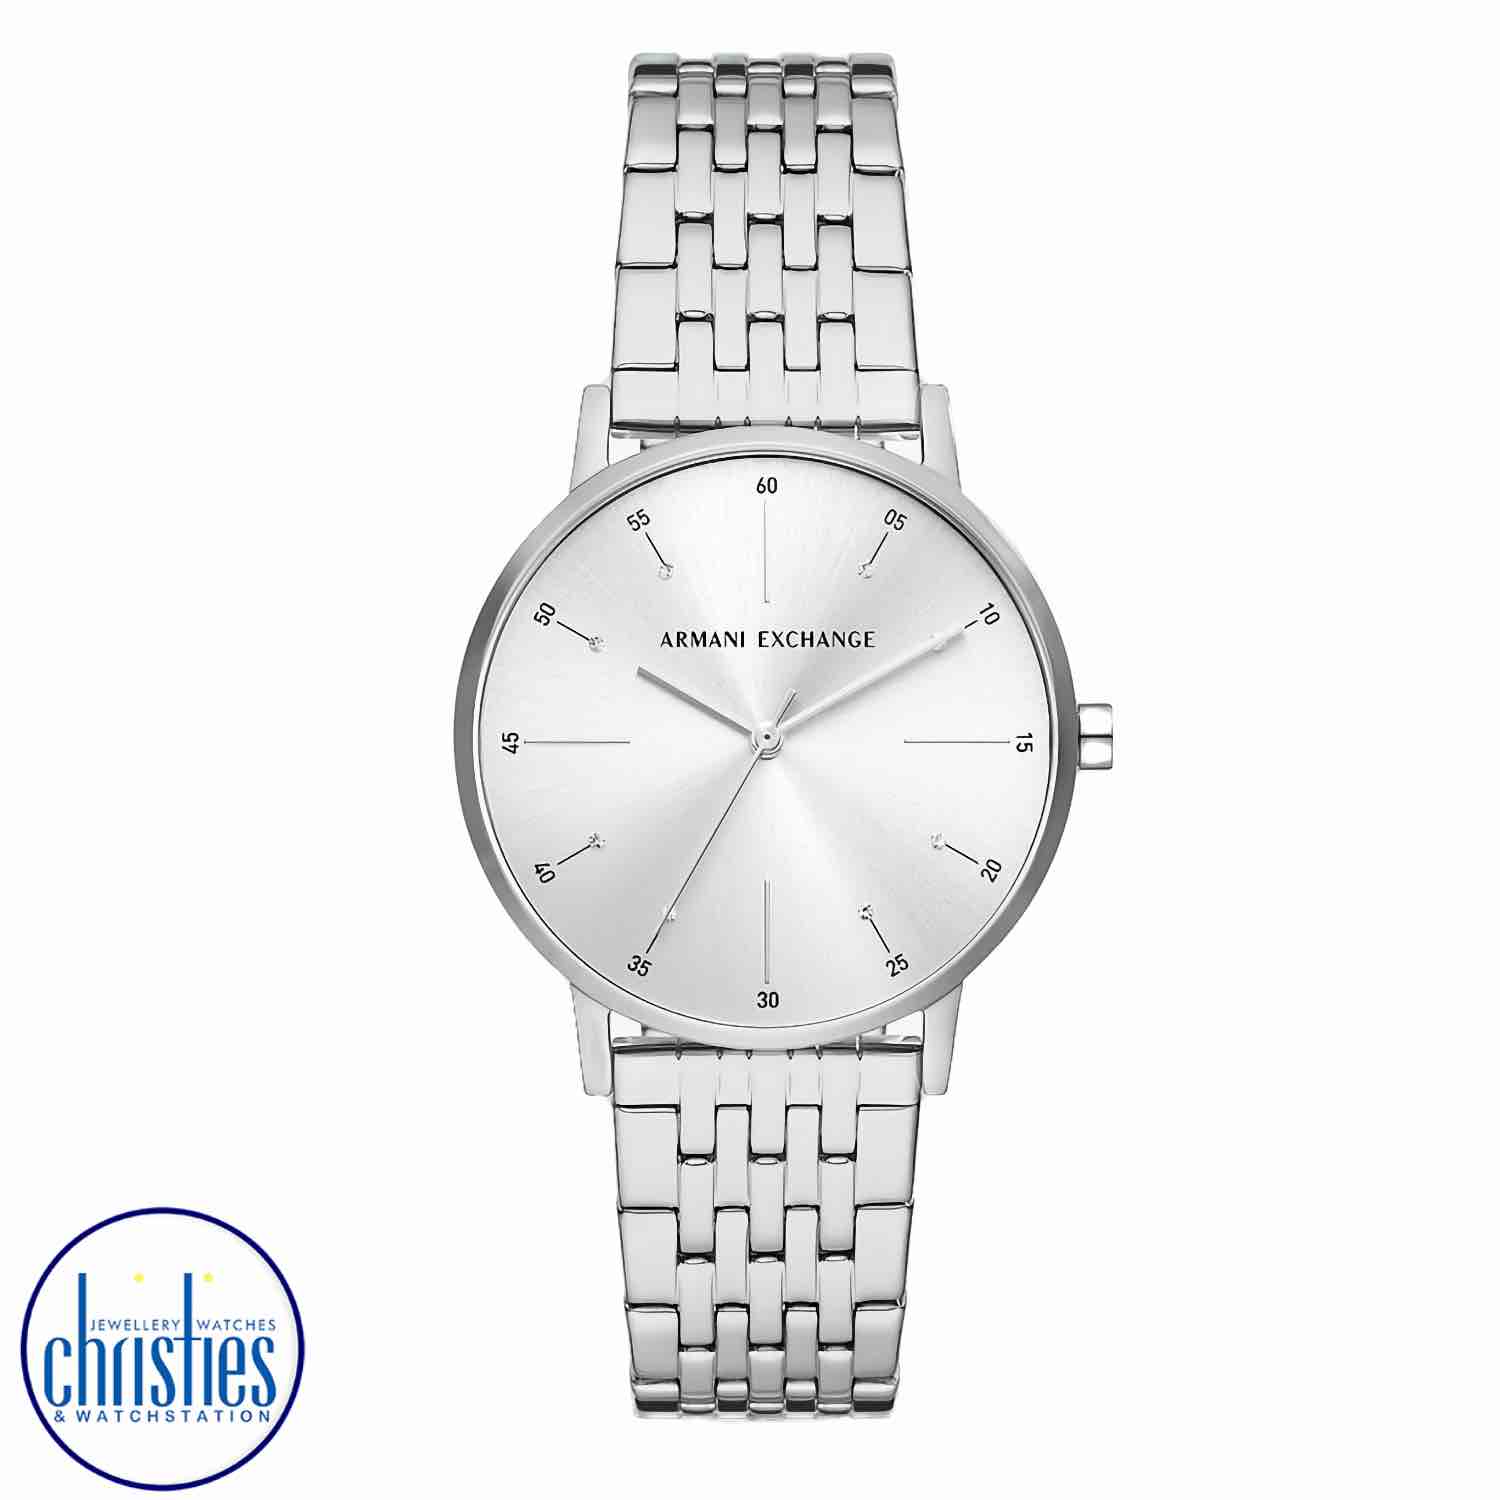 AX5578 A|X Armani Exchange Stainless Steel Watch. AX5578 A|X Armani Exchange Three-Hand Stainless Steel WatchAfterpay - Split your purchase into 4 instalments - Pay for your purchase over 4 instalments, due every two weeks.